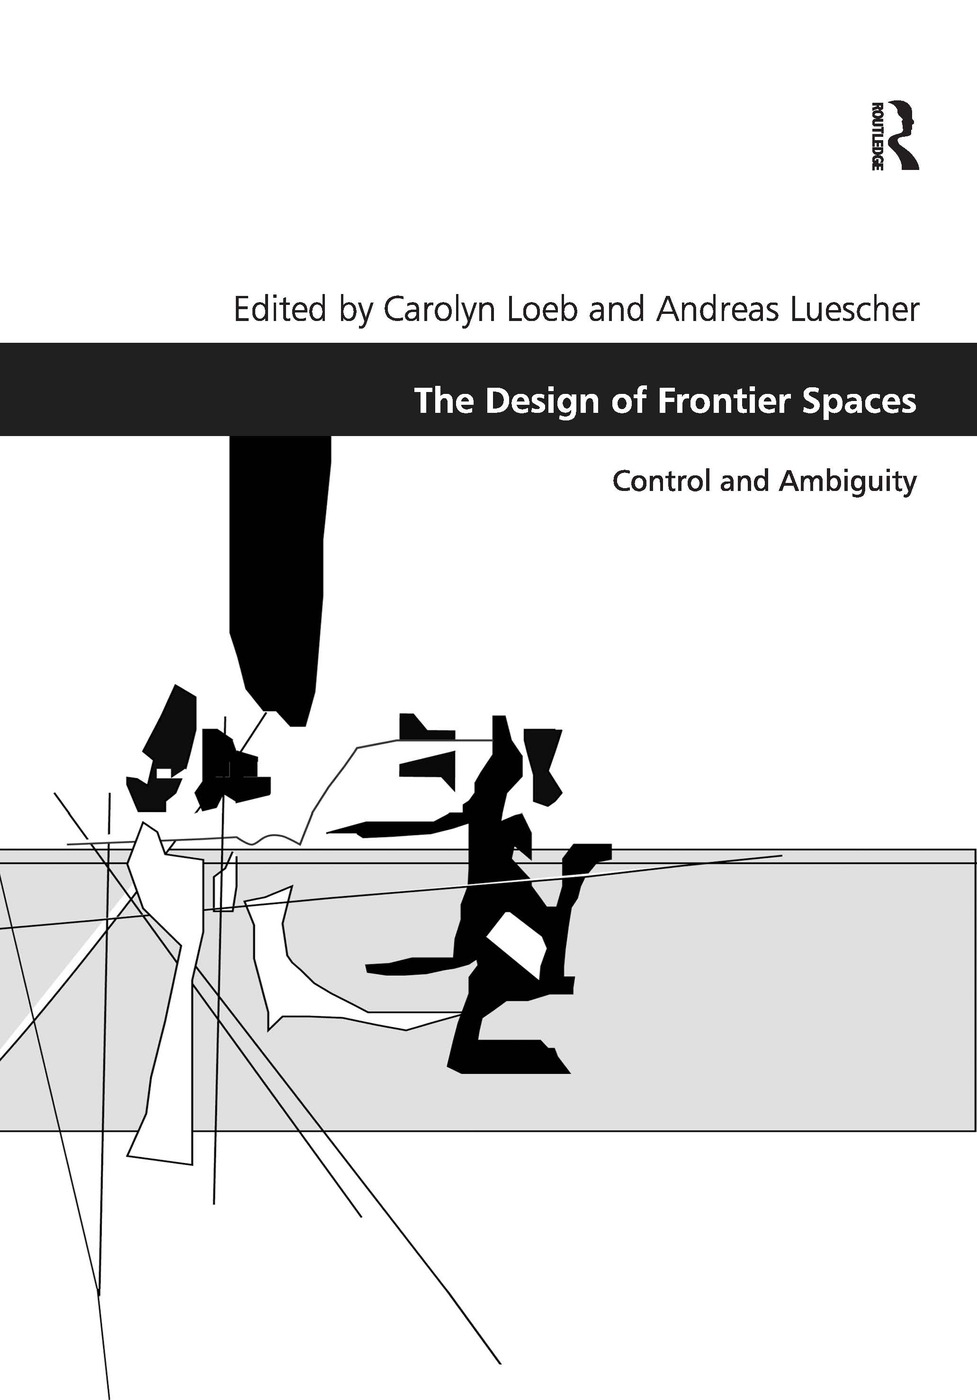 The Design of Frontier Spaces: Control and Ambiguity